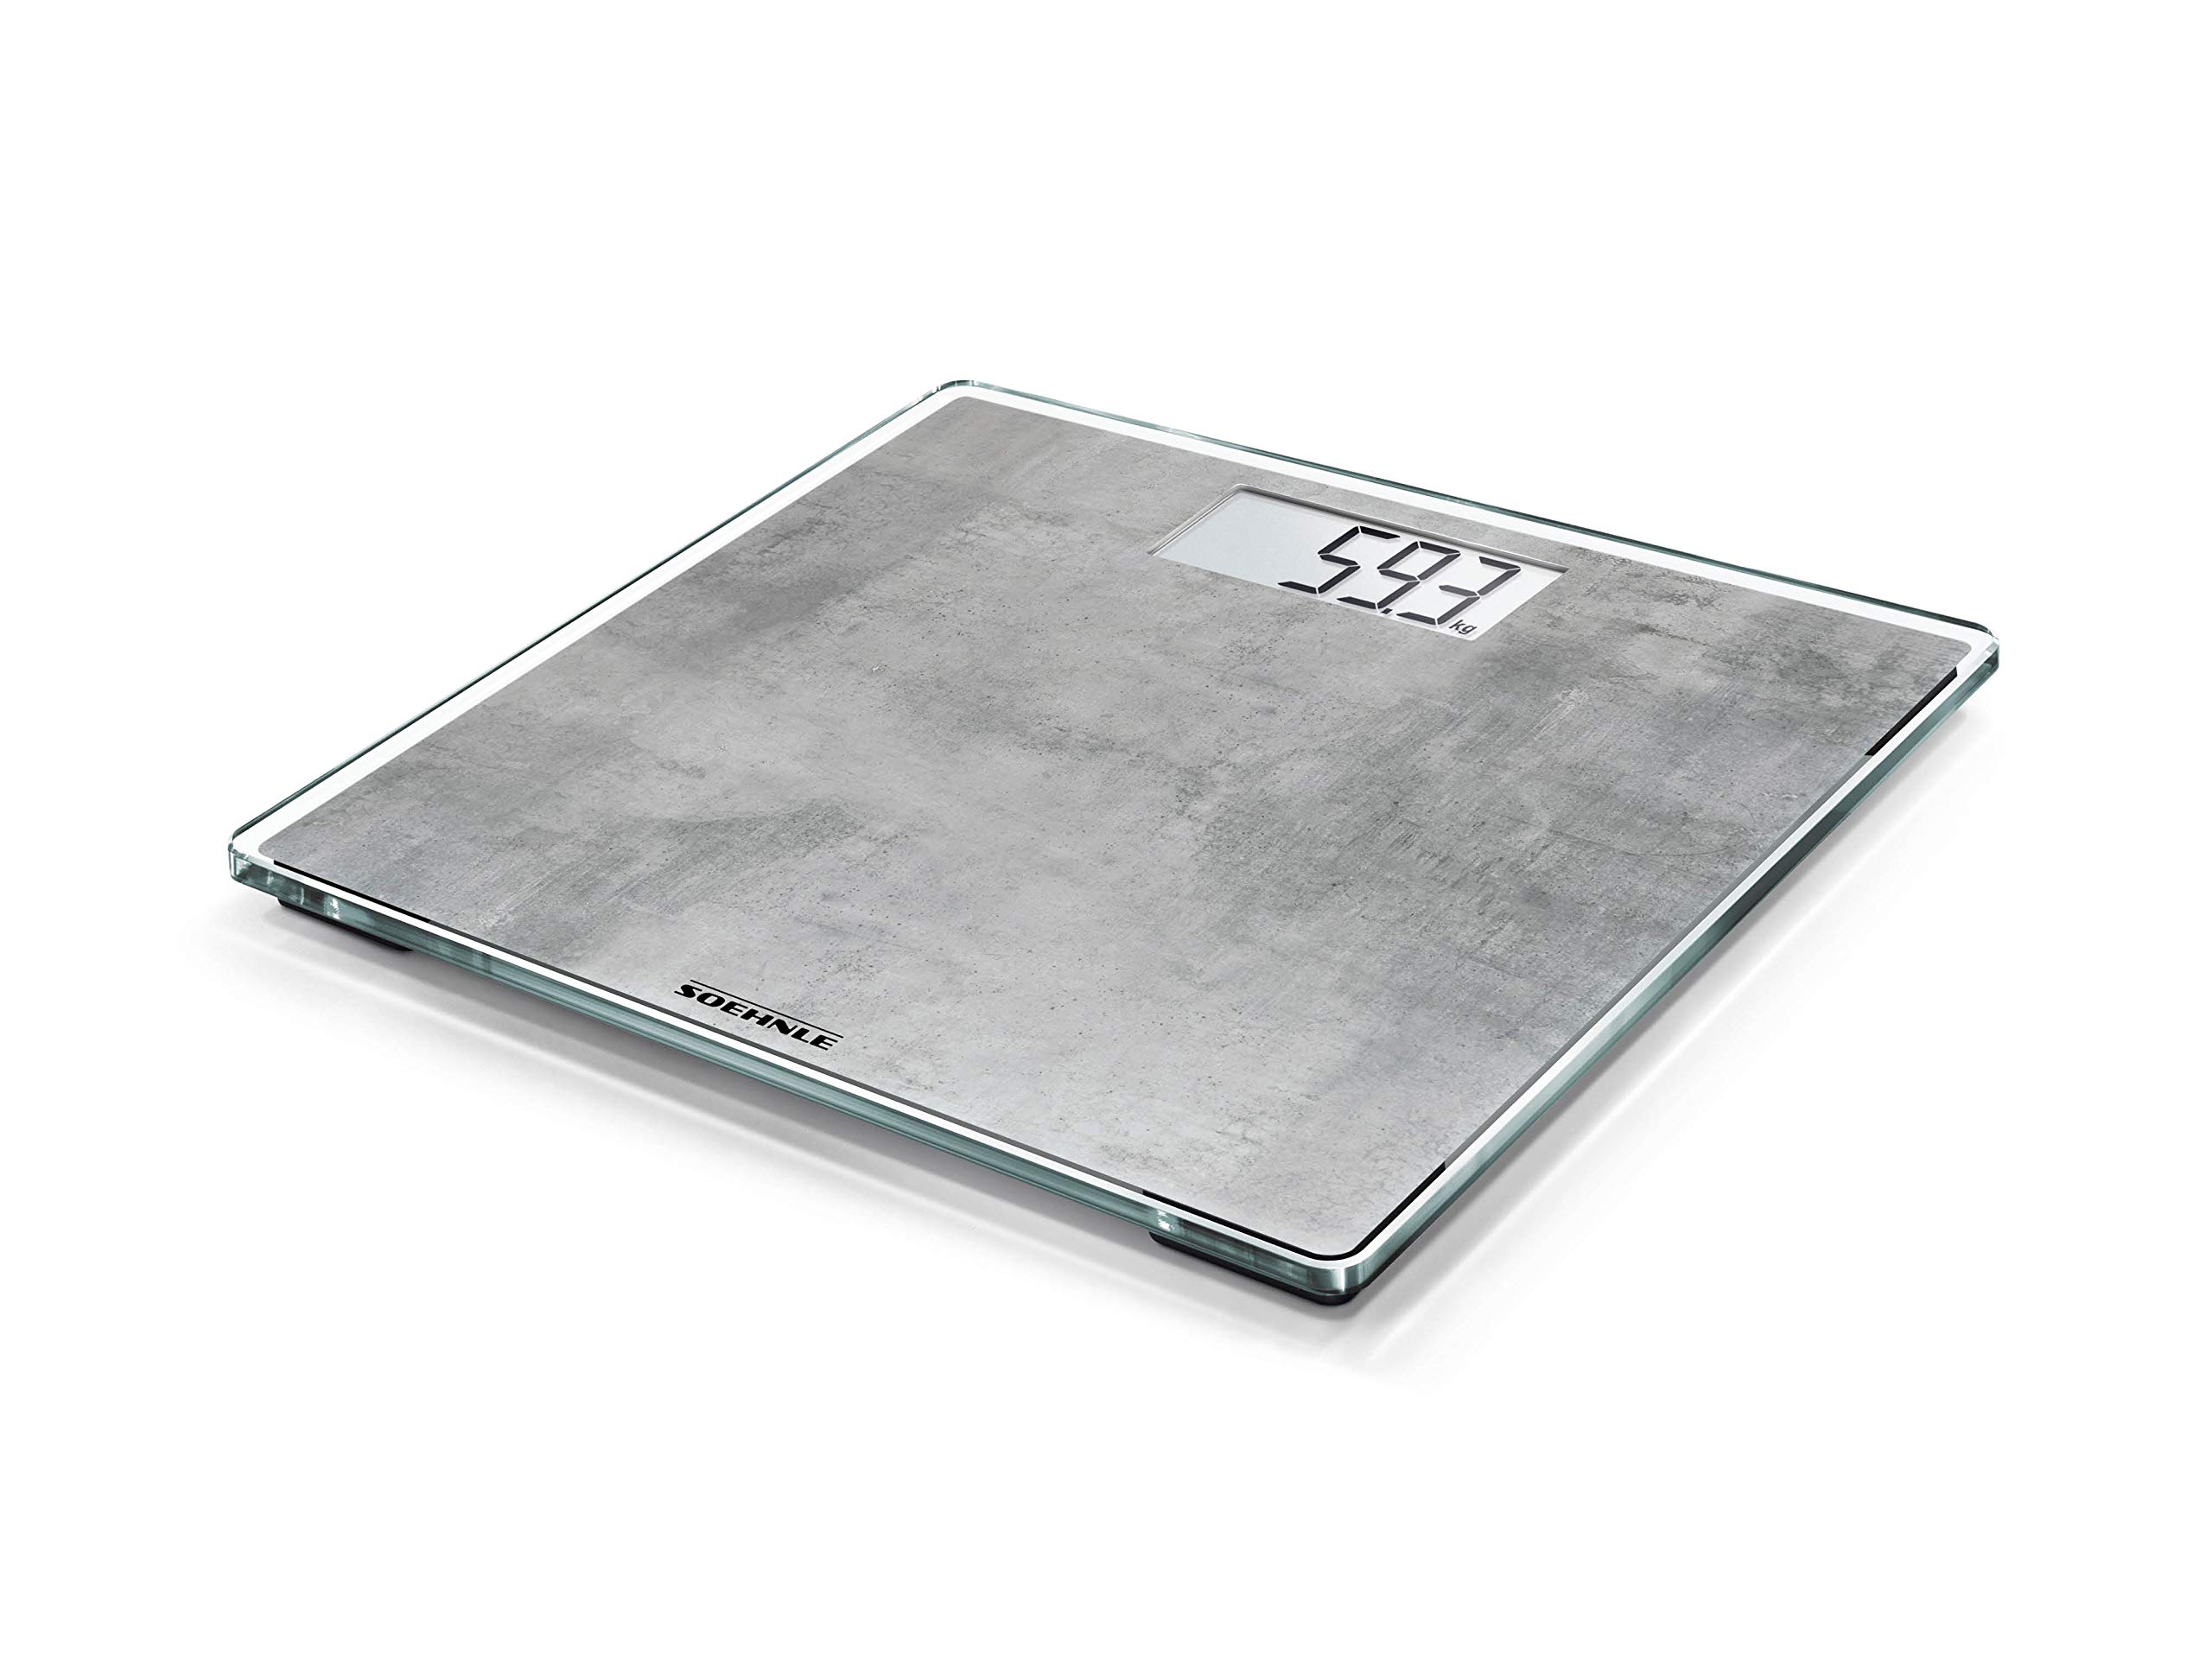 Soehnle 63882 Style Sense Compact 300 Concrete Digital Body Scales with LCD Display